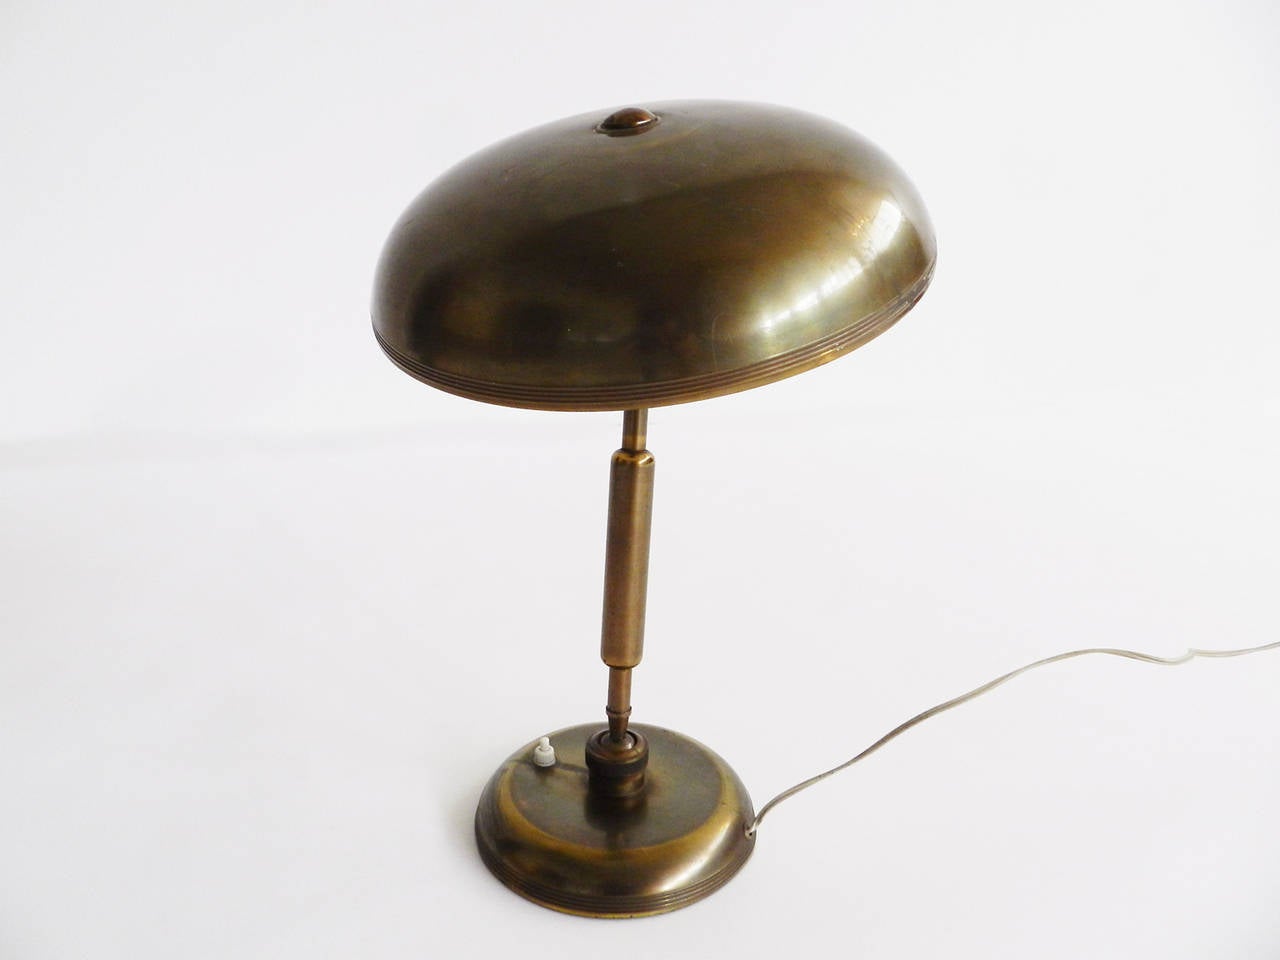 Adjustable table lamp in the manner of Arredoluce, Italy.